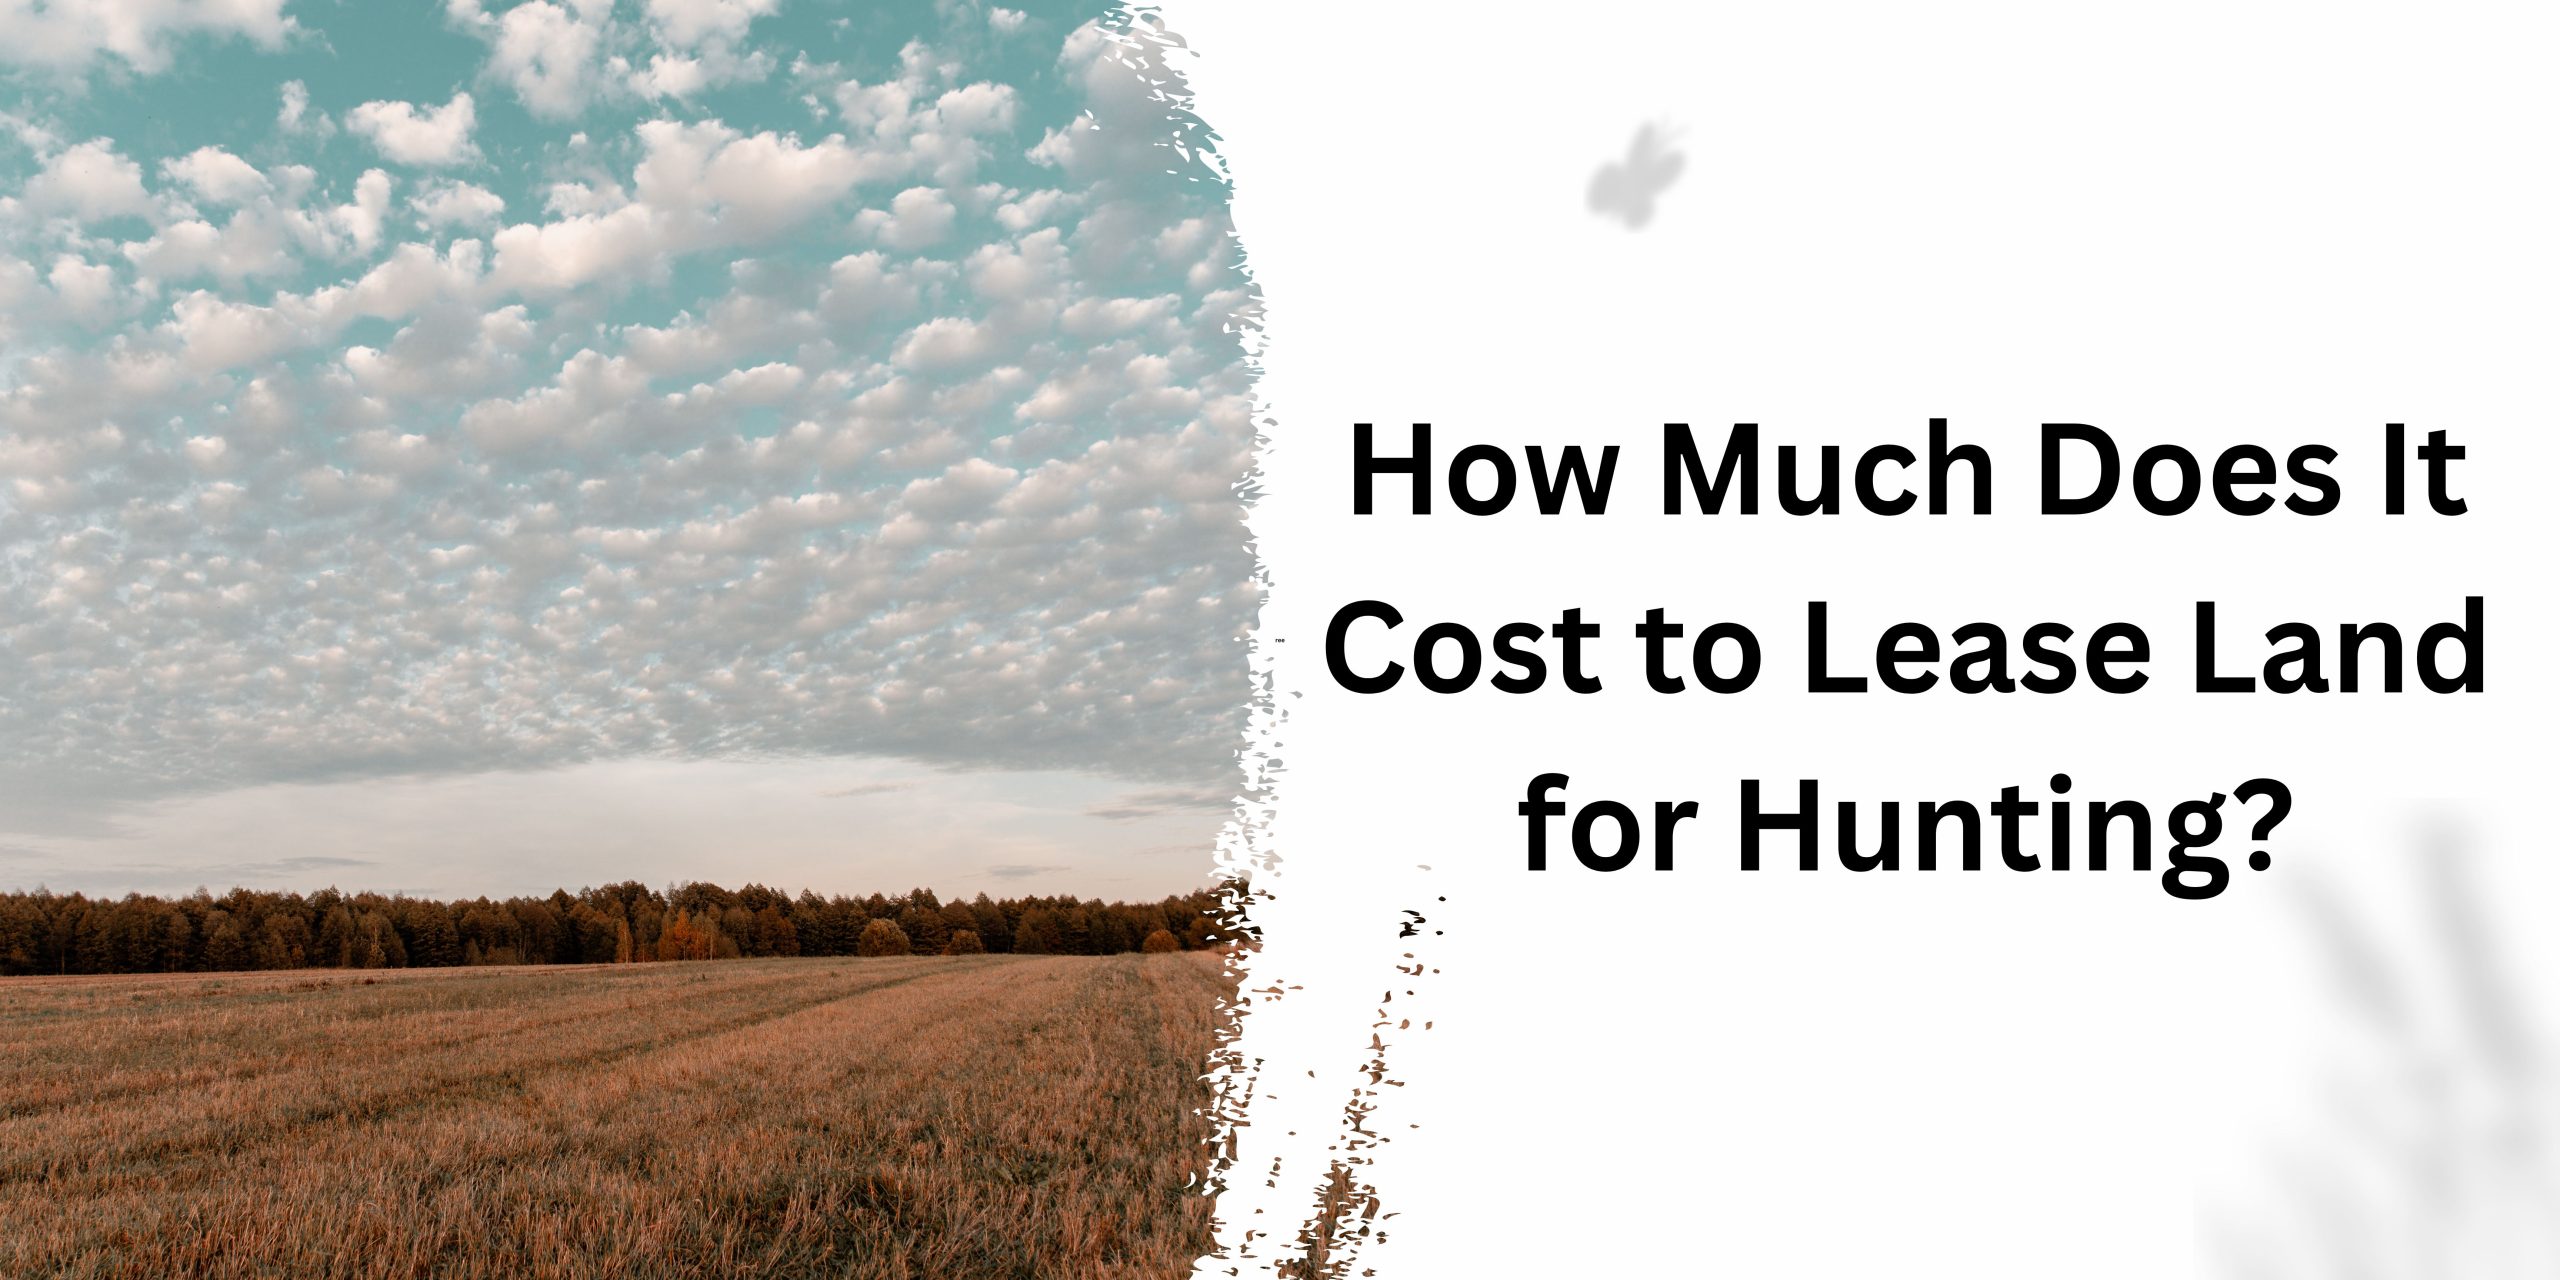 How Much Does It Cost to Lease Land for Hunting